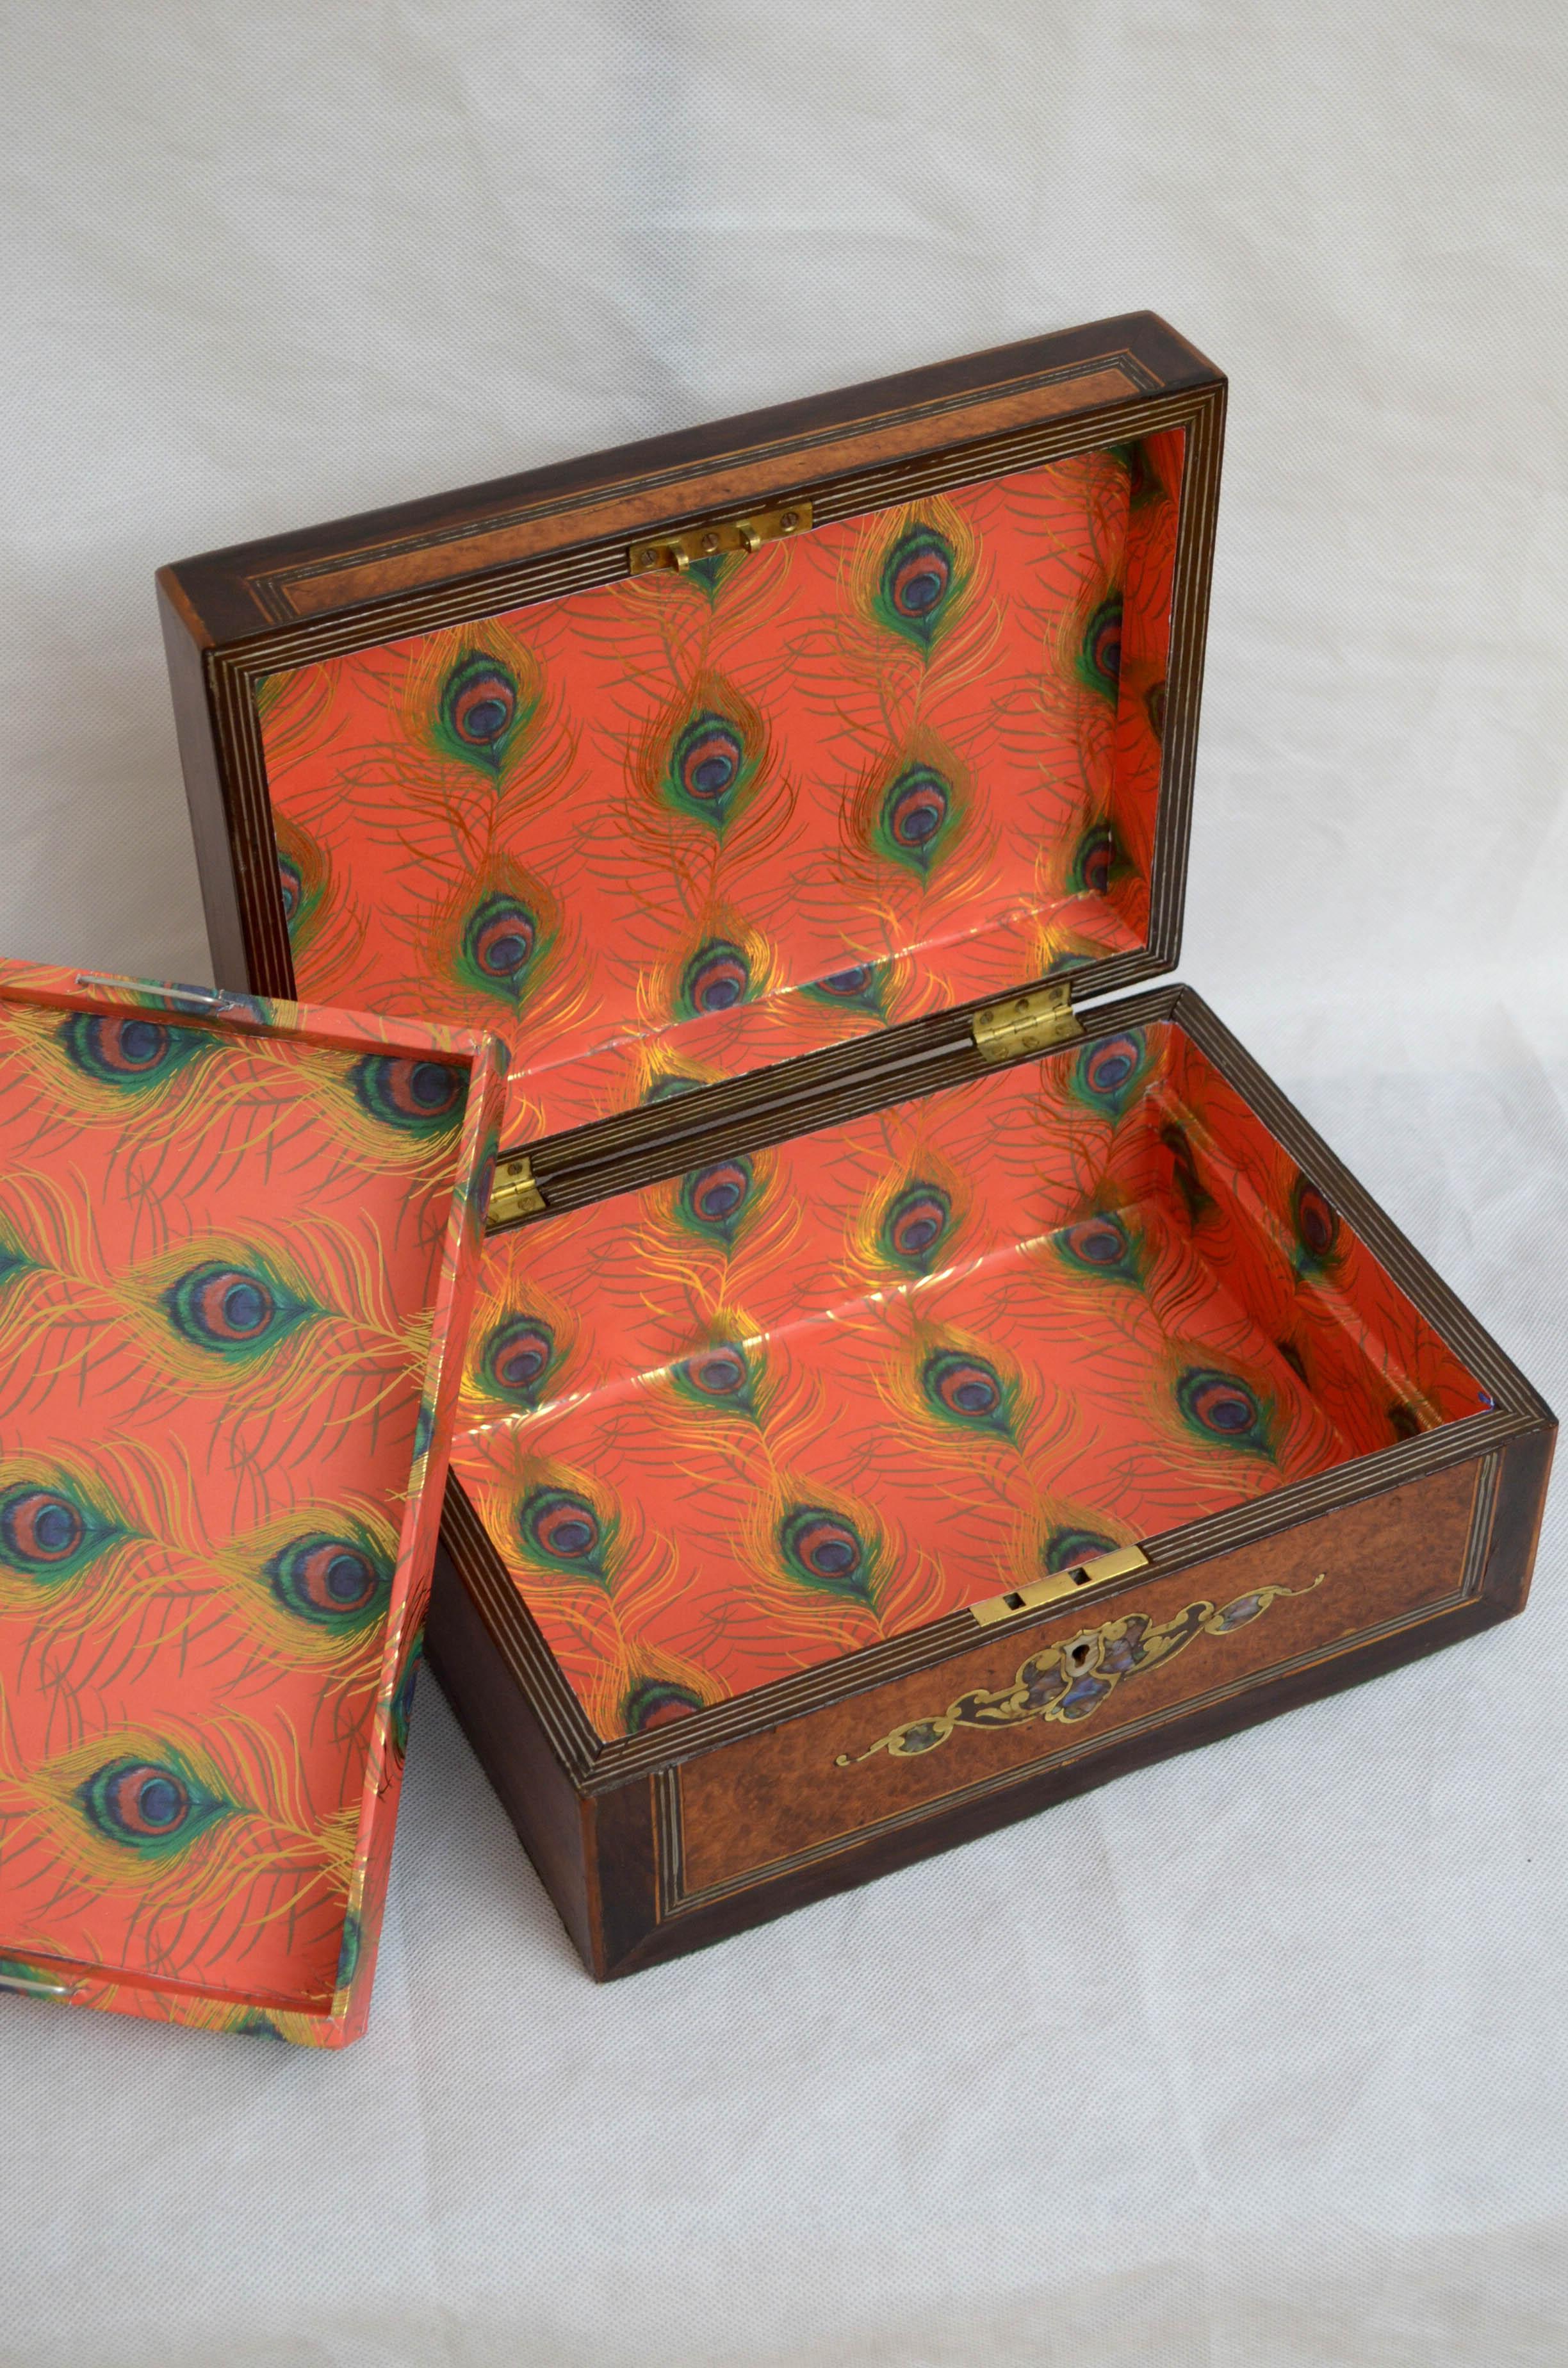 Magnificent Victorian Jewelry Box in Amboyna In Good Condition For Sale In Whaley Bridge, GB